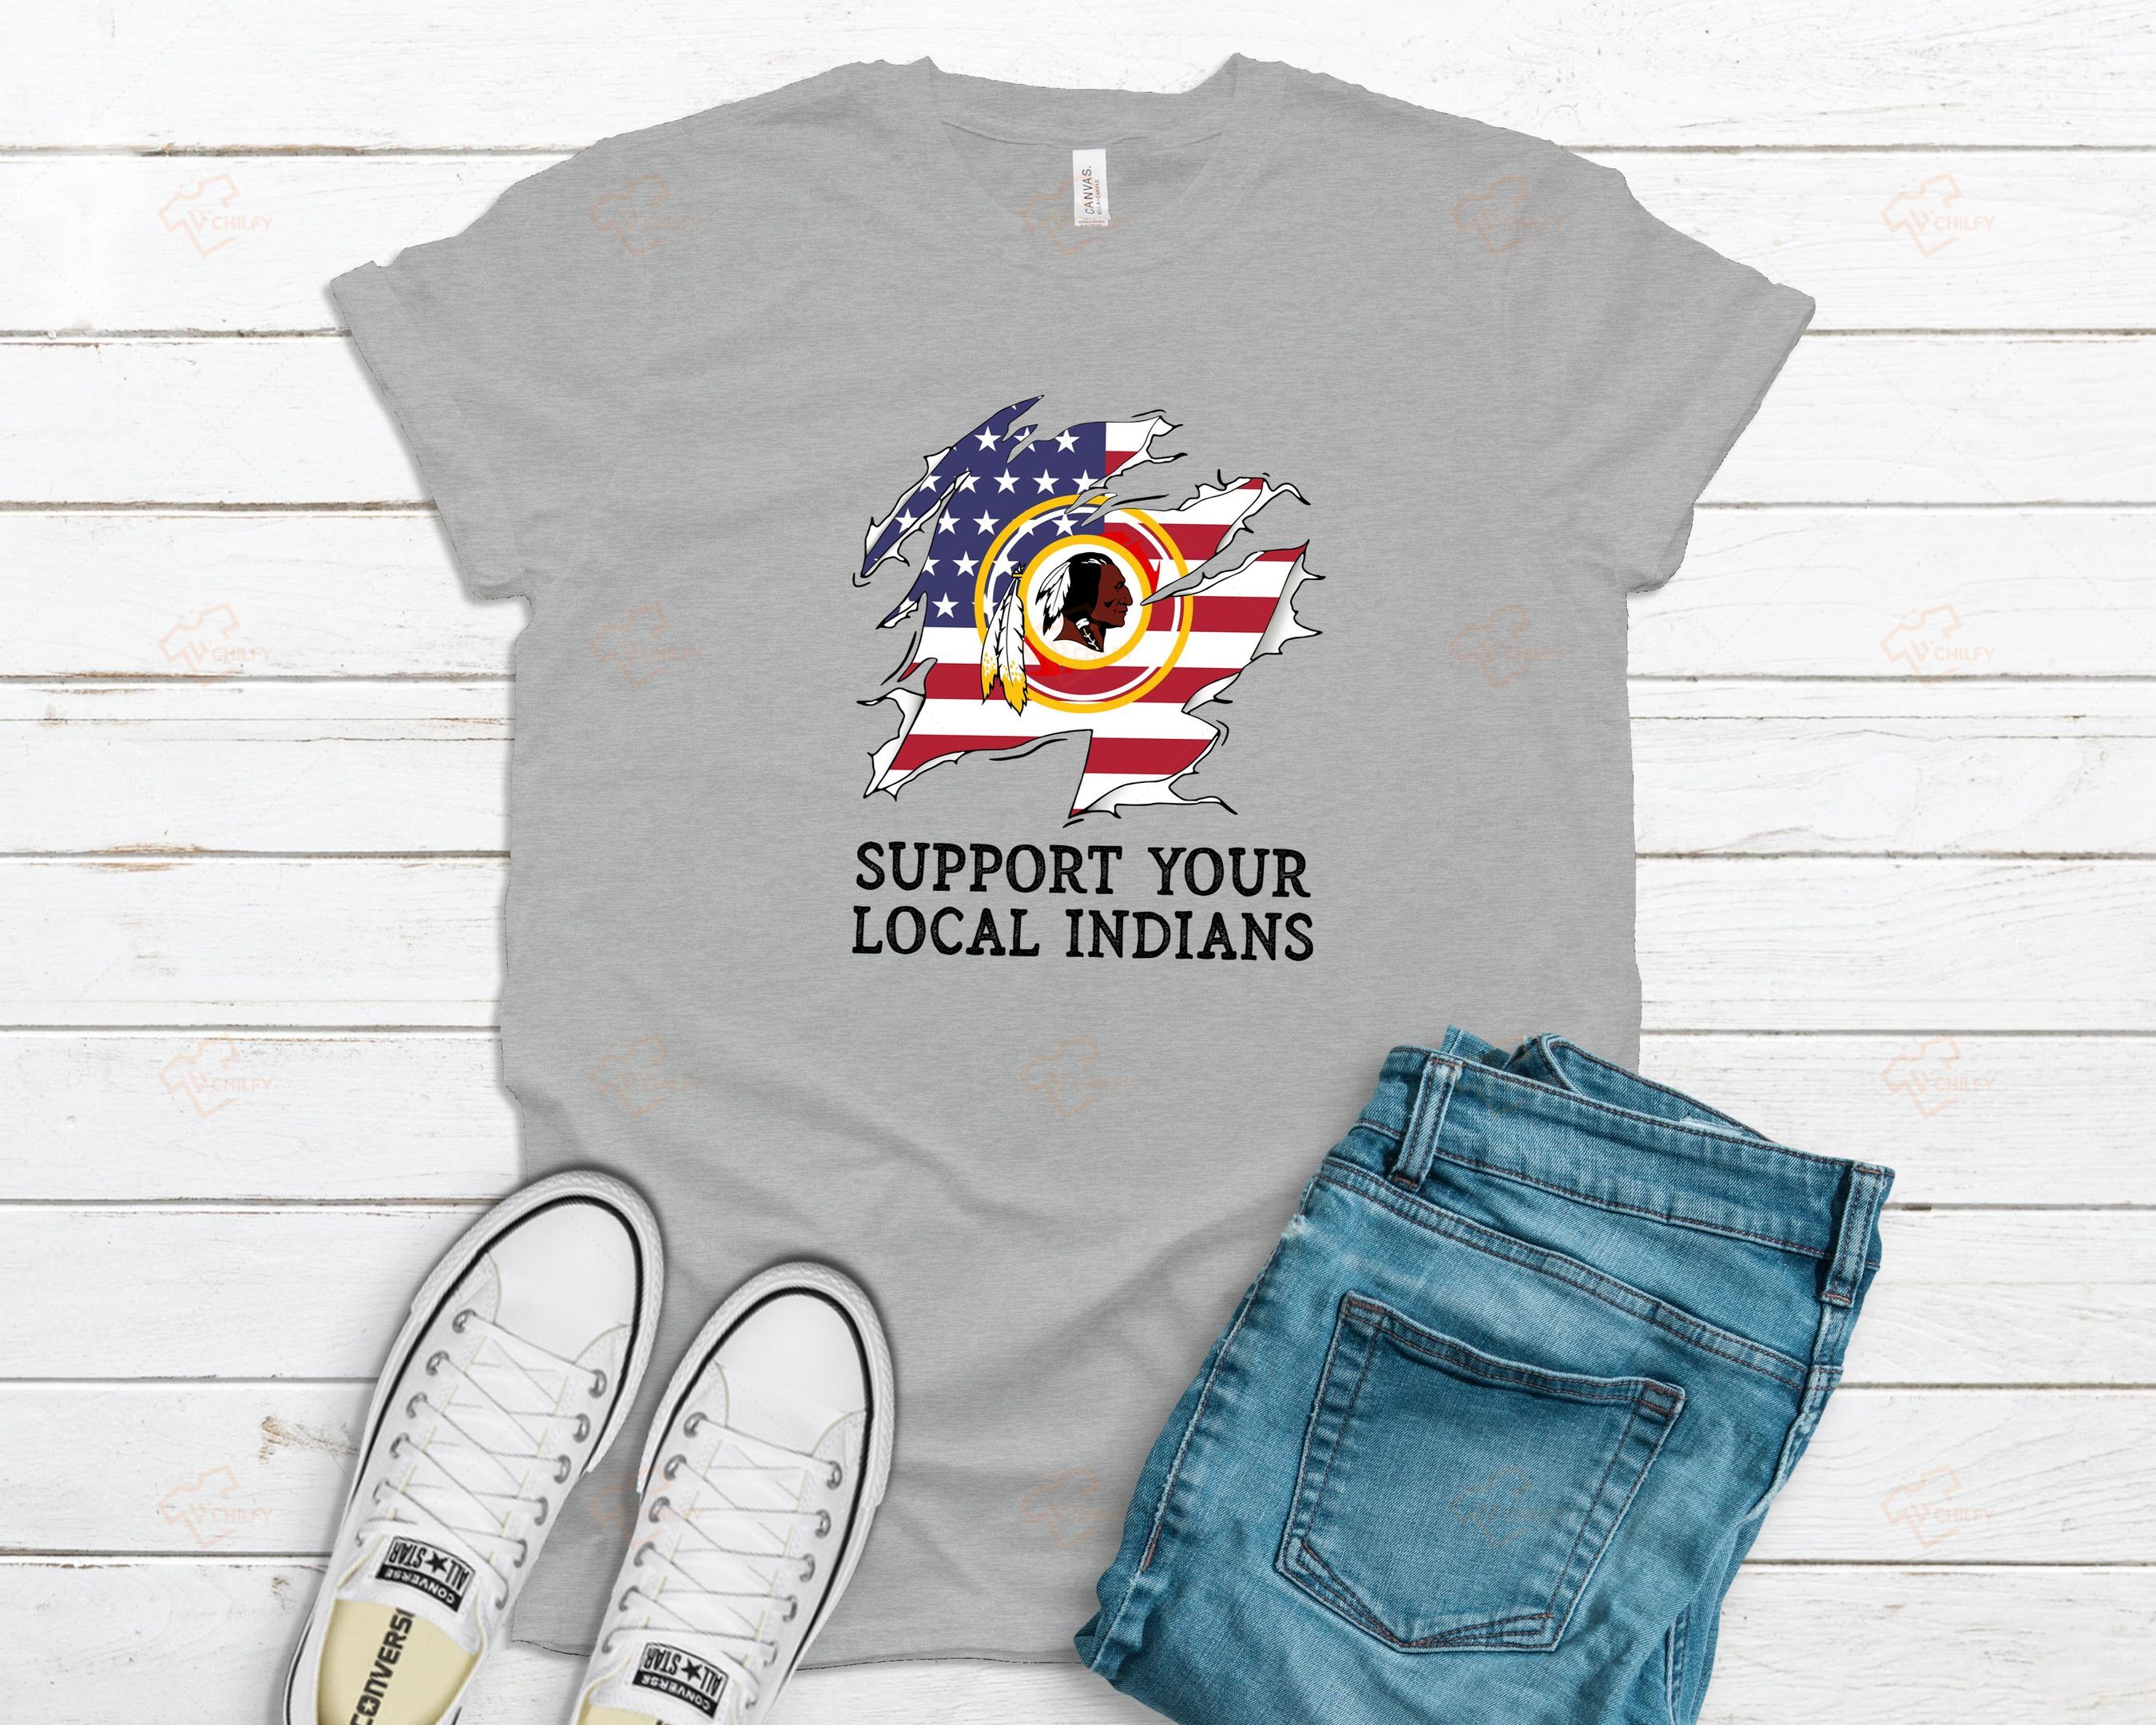 Support your local Indians, shirt for Native American, NDN pride shirt, Native pride shirt